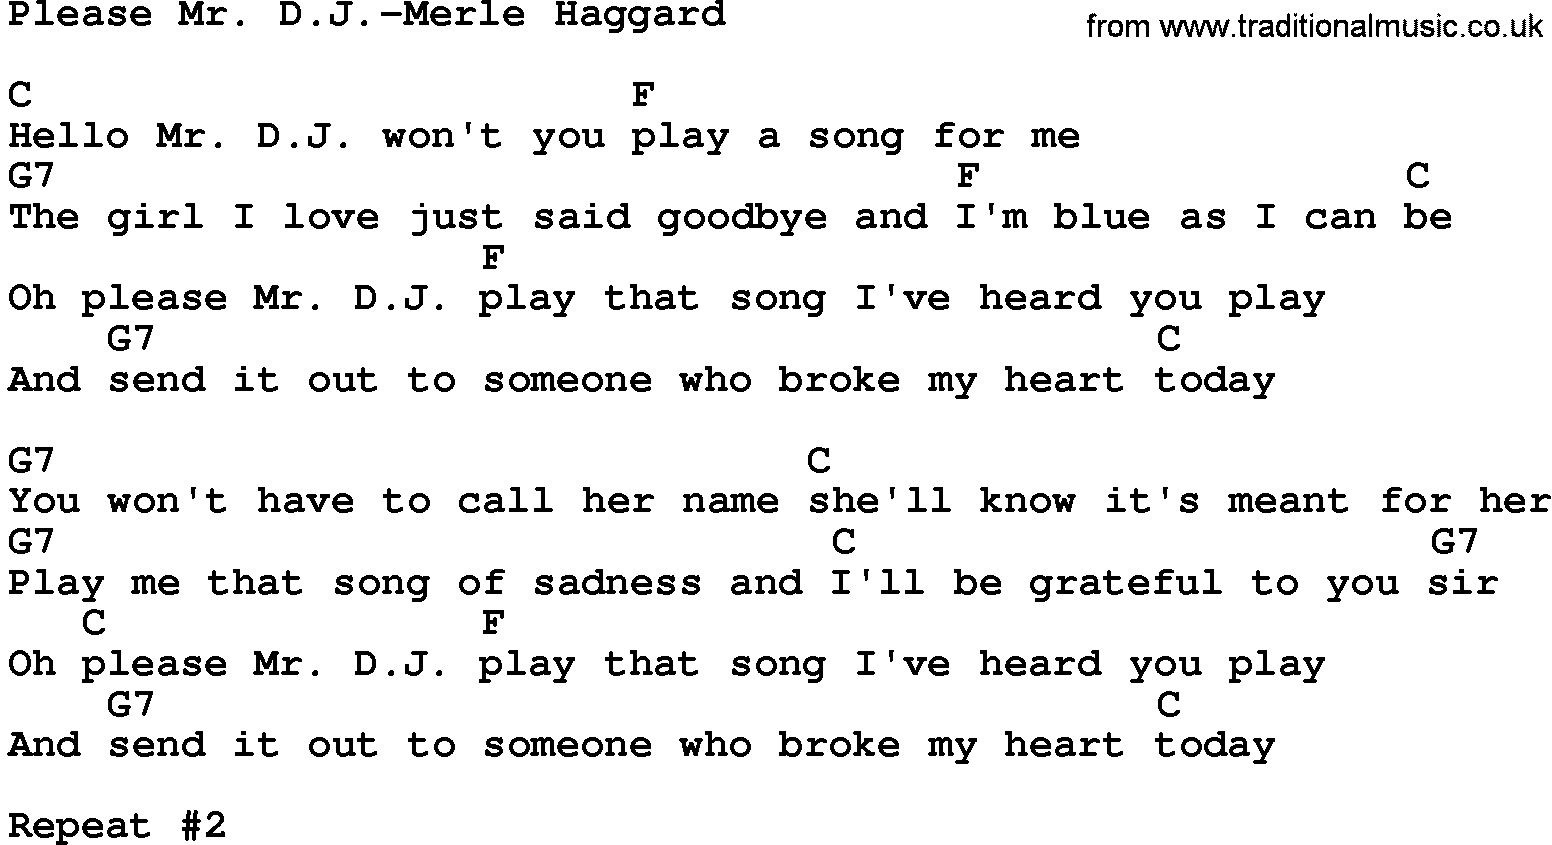 Country music song: Please Mr Dj-Merle Haggard lyrics and chords